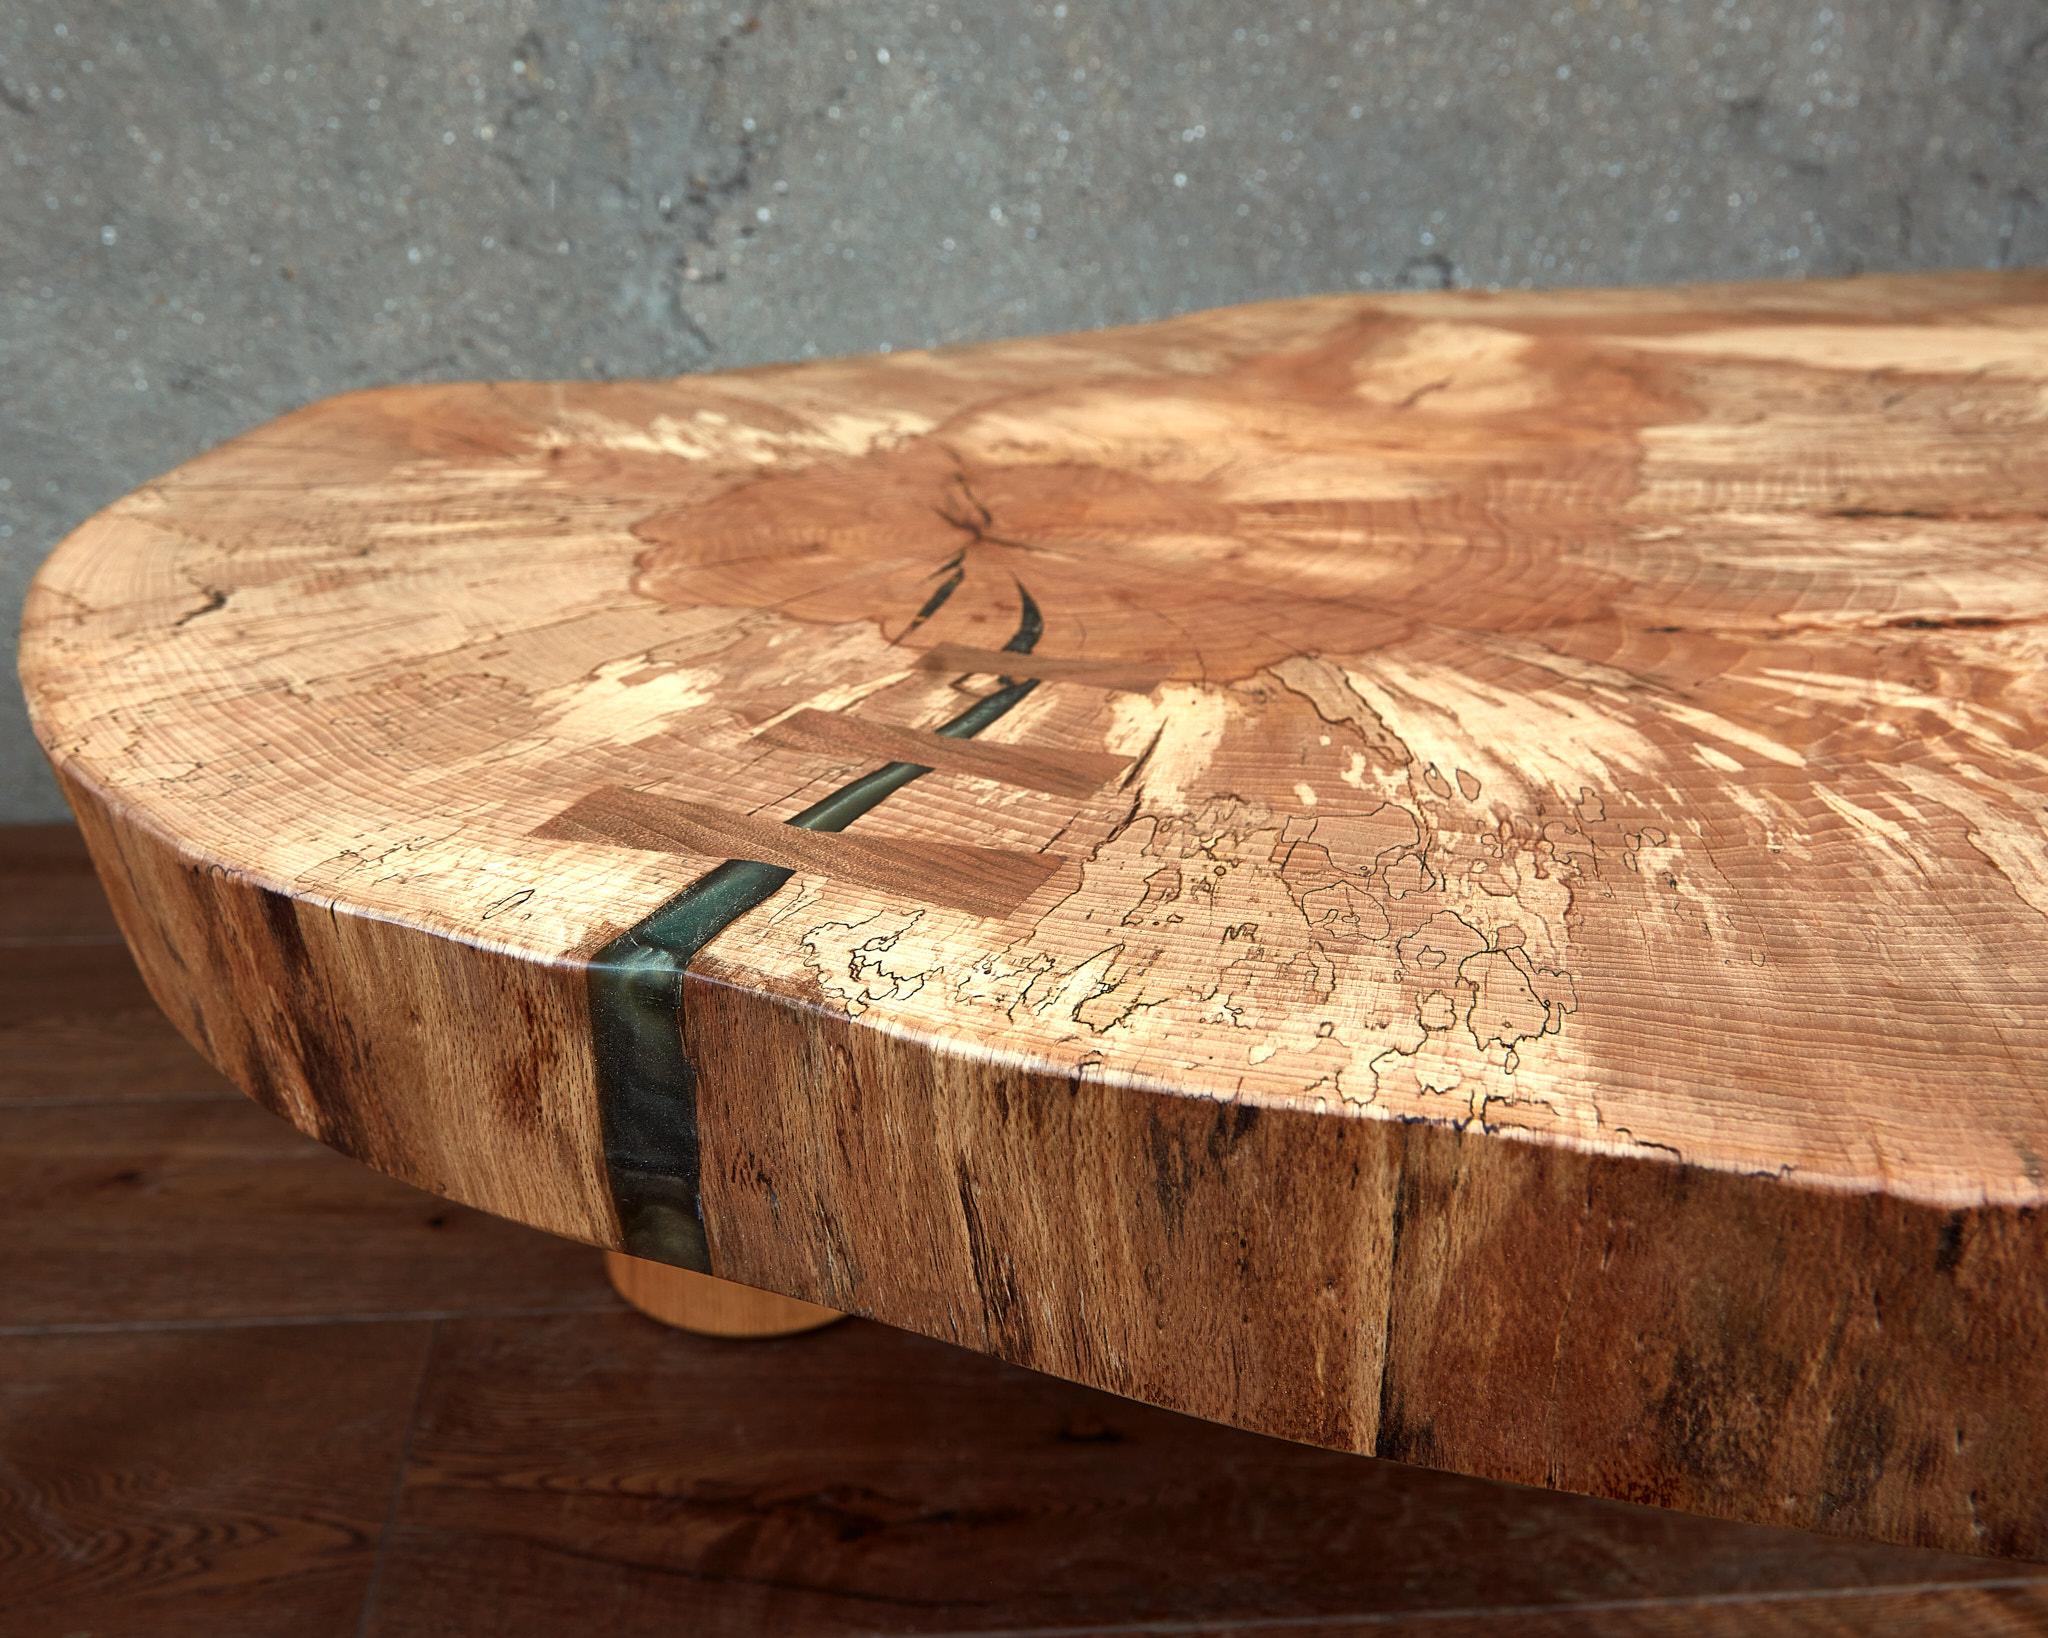 Arts and Crafts Cocoon Live Edge Beech Coffee Table by Egor Ivoilov, Contemporary Design 2022 For Sale